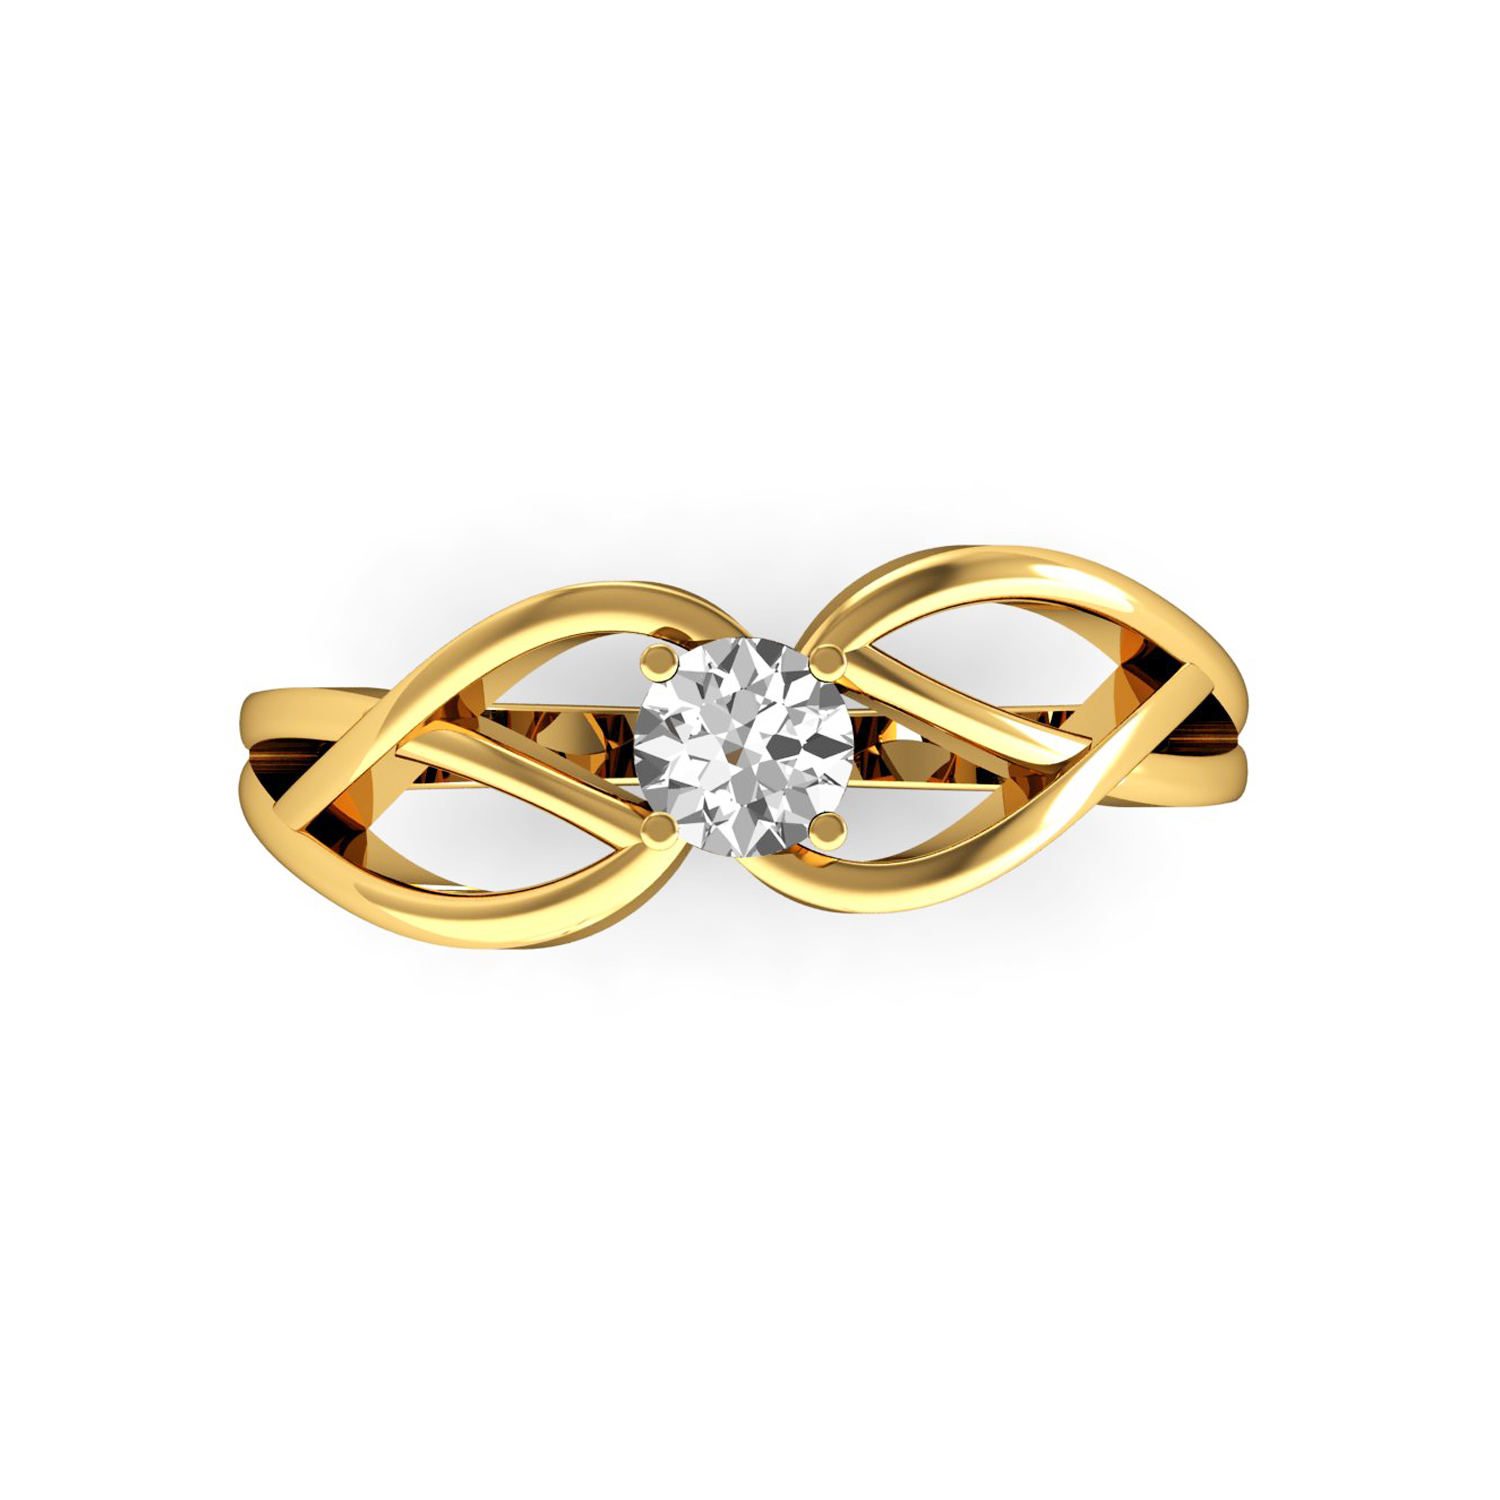 Solid Gold Genuine Diamond Engagement Ring